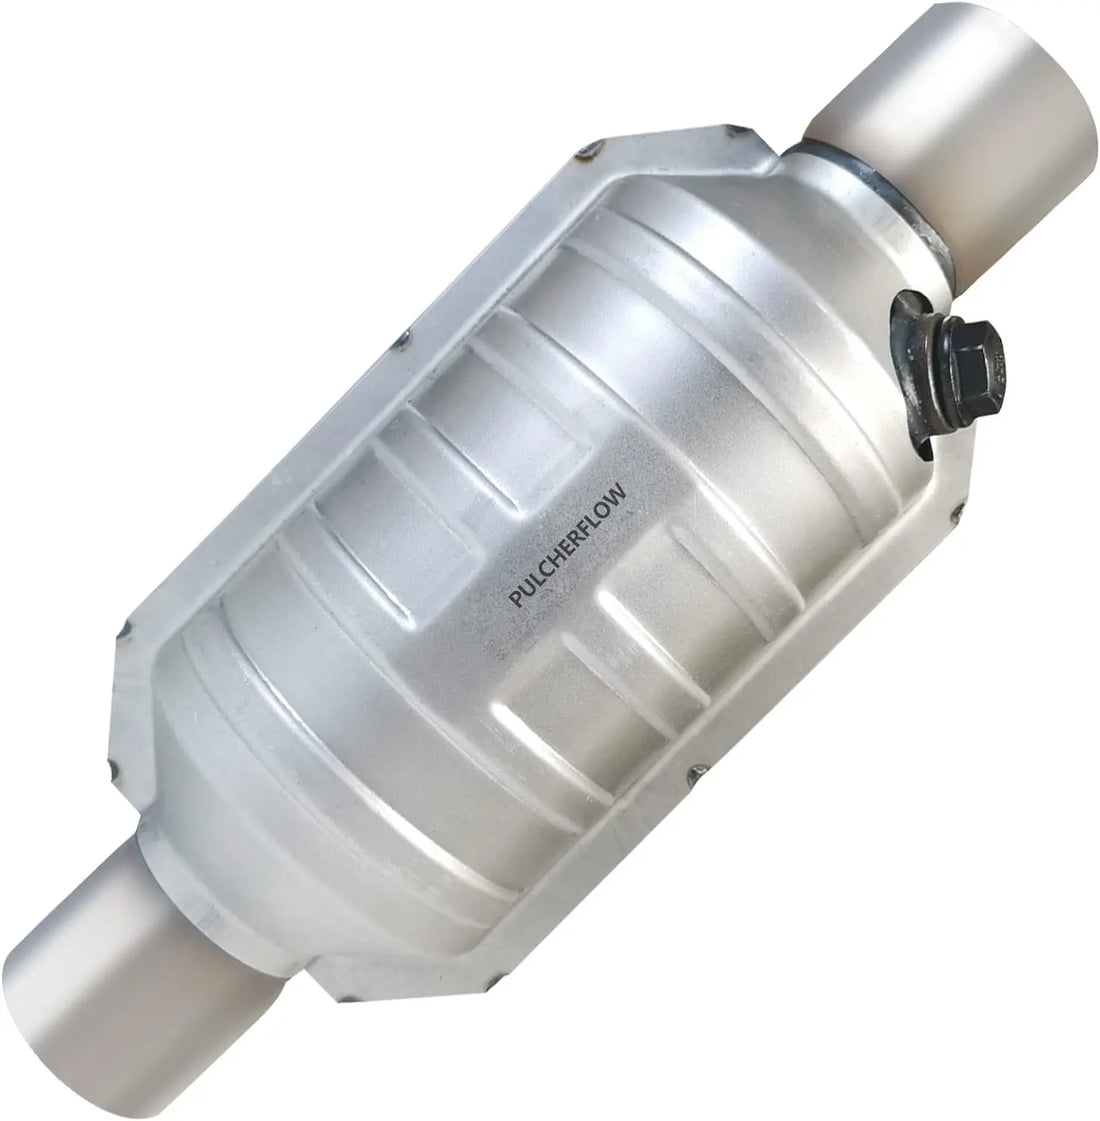 PULCHERFLOW 2.25 Inch Inlet/Outlet Universal Catalytic Converter with Heat Shield Stainless Steel (EPA Compliant) Pulcherflow